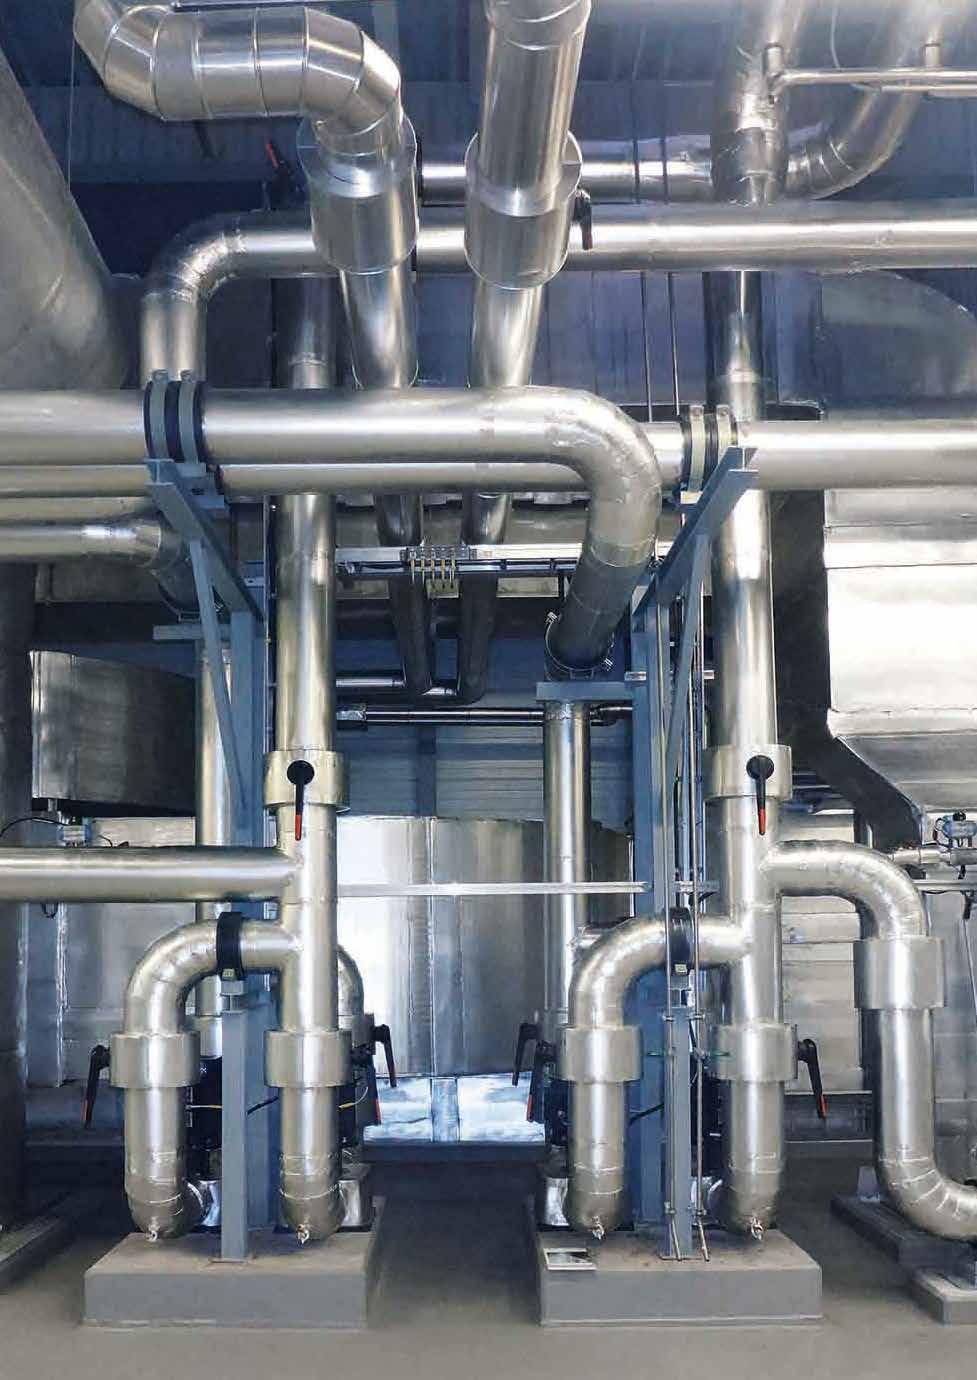 The requirements Air-handling system is a key component of the patented production line The wet-spinning process results in very high temperatures and high humidity in the production areas.